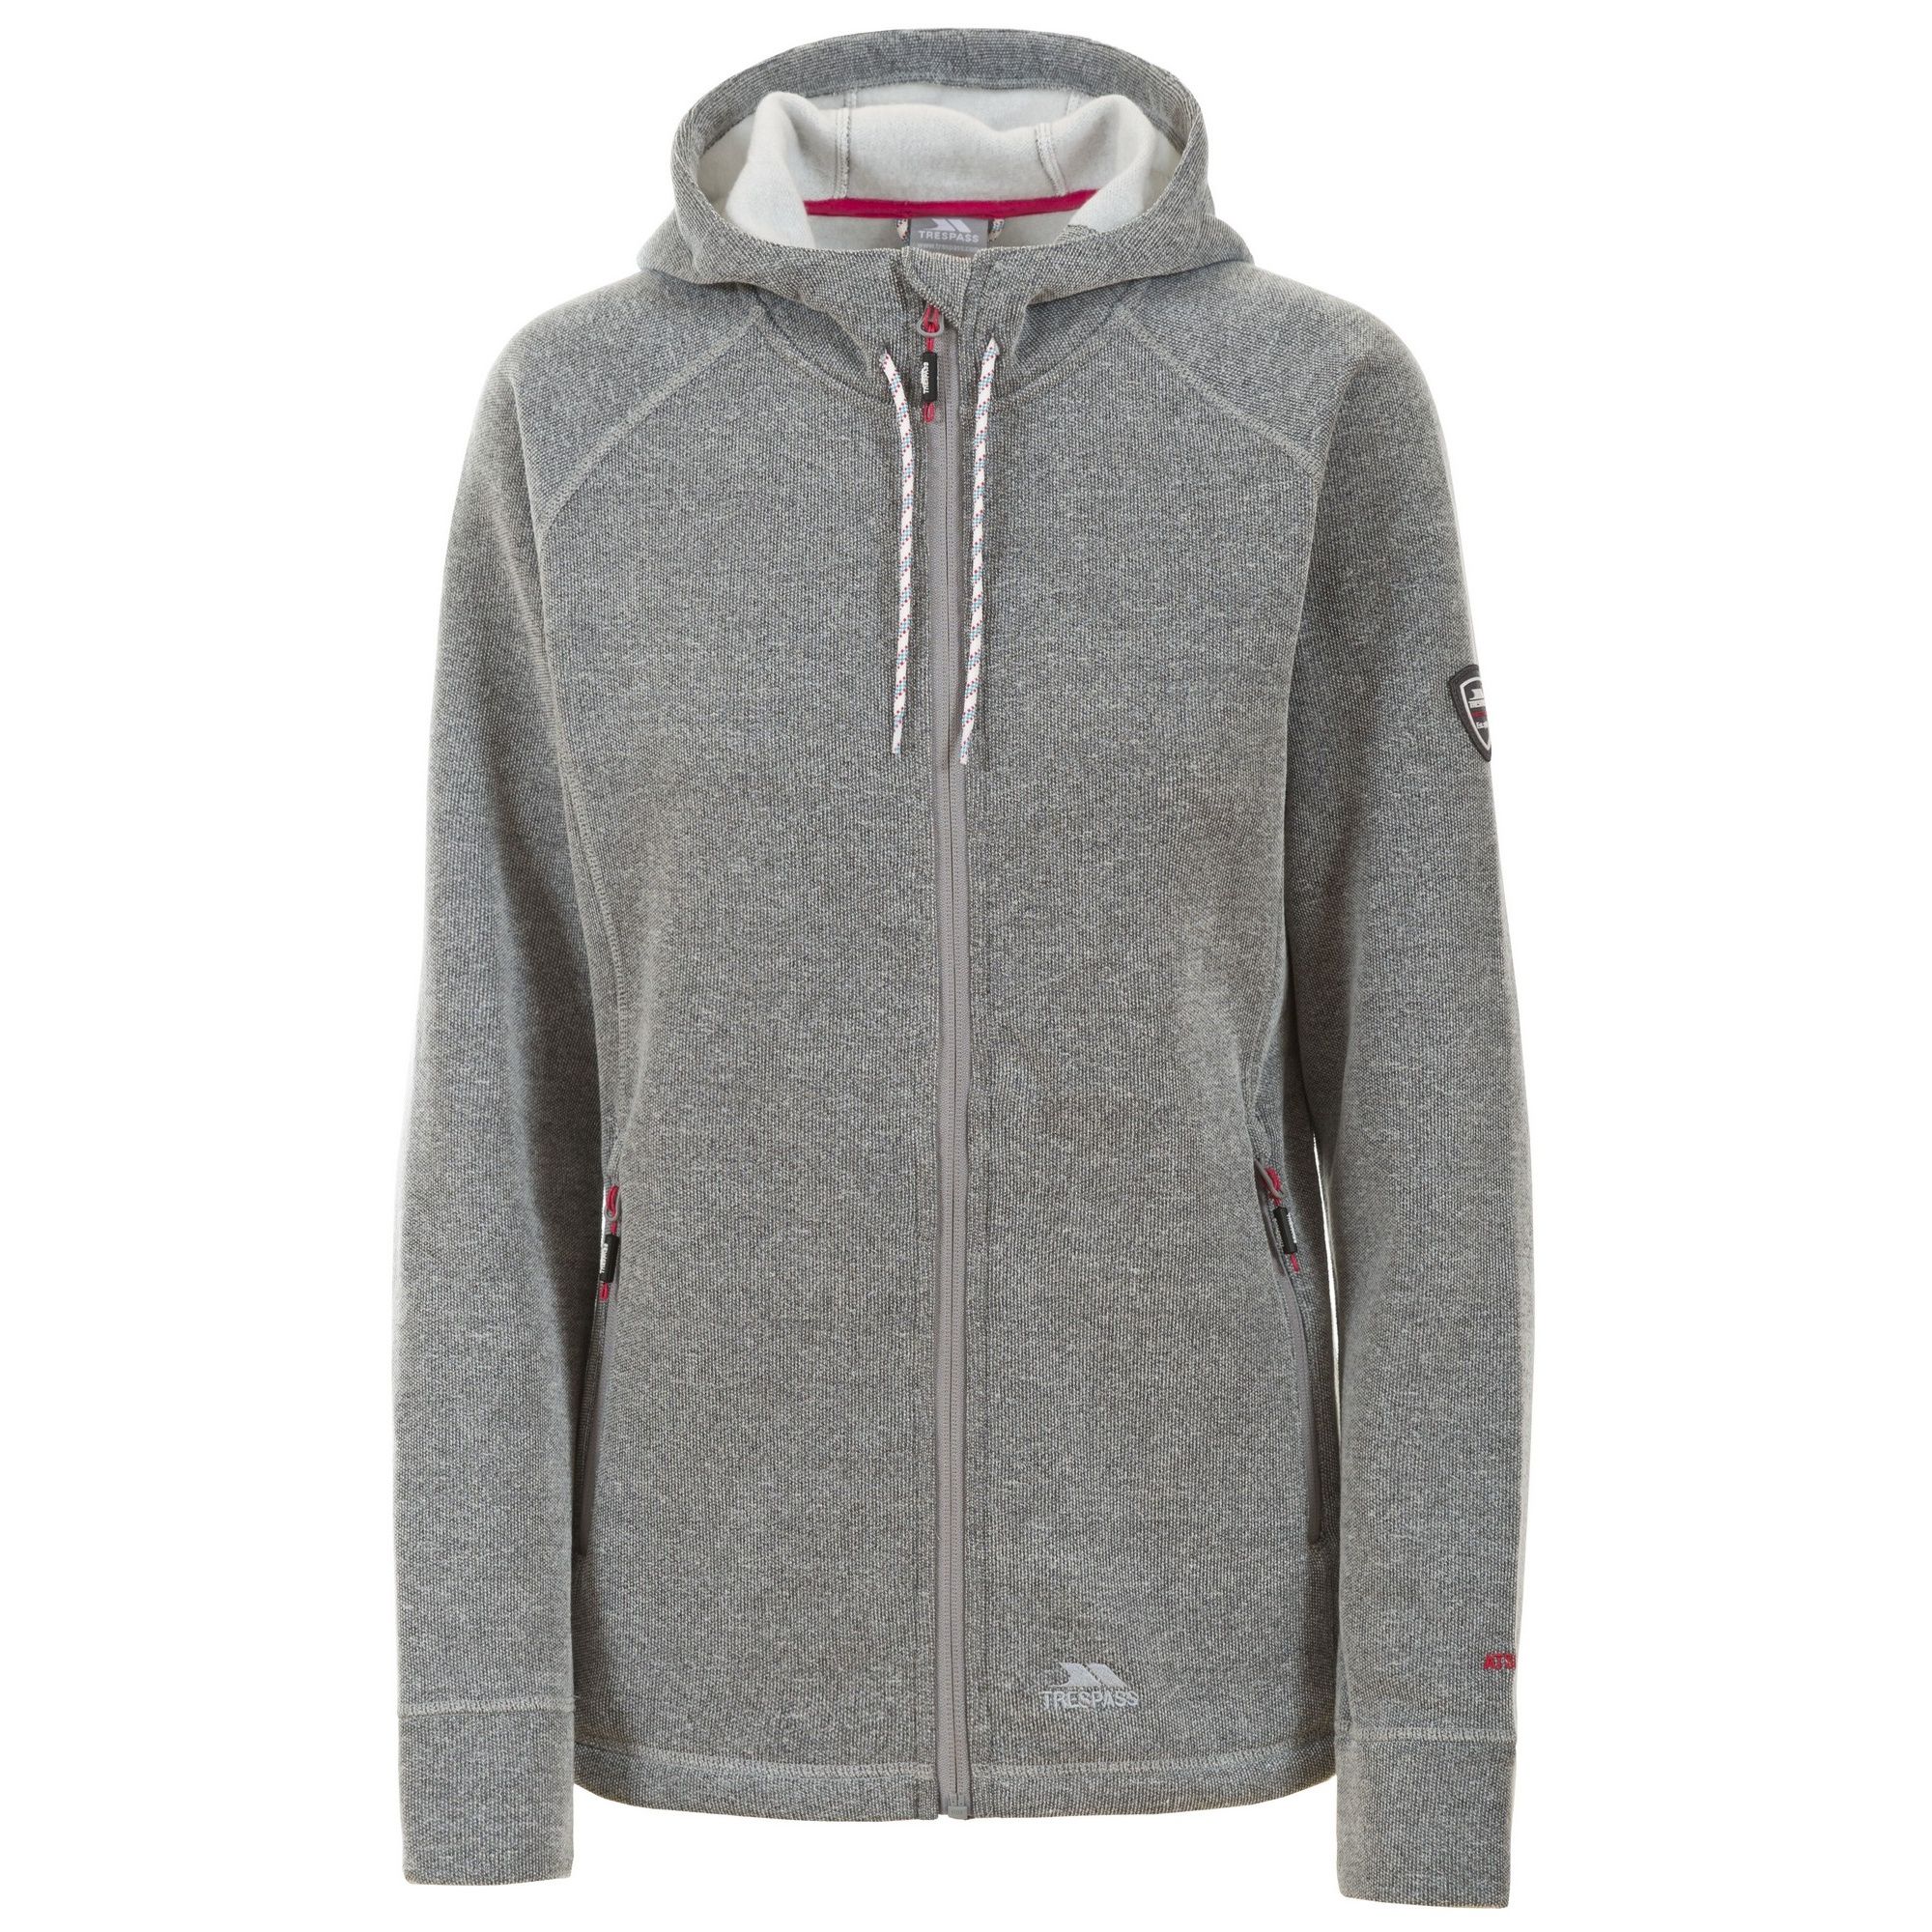 Knitted textured marl fleece. Back side brushed. Grown on hood. Tie adjustment on hood. Chinguard. 2 contrast zip pockets. Airtrap. 100% Polyester. Trespass Womens Chest Sizing (approx): XS/8 - 32in/81cm, S/10 - 34in/86cm, M/12 - 36in/91.4cm, L/14 - 38in/96.5cm, XL/16 - 40in/101.5cm, XXL/18 - 42in/106.5cm.